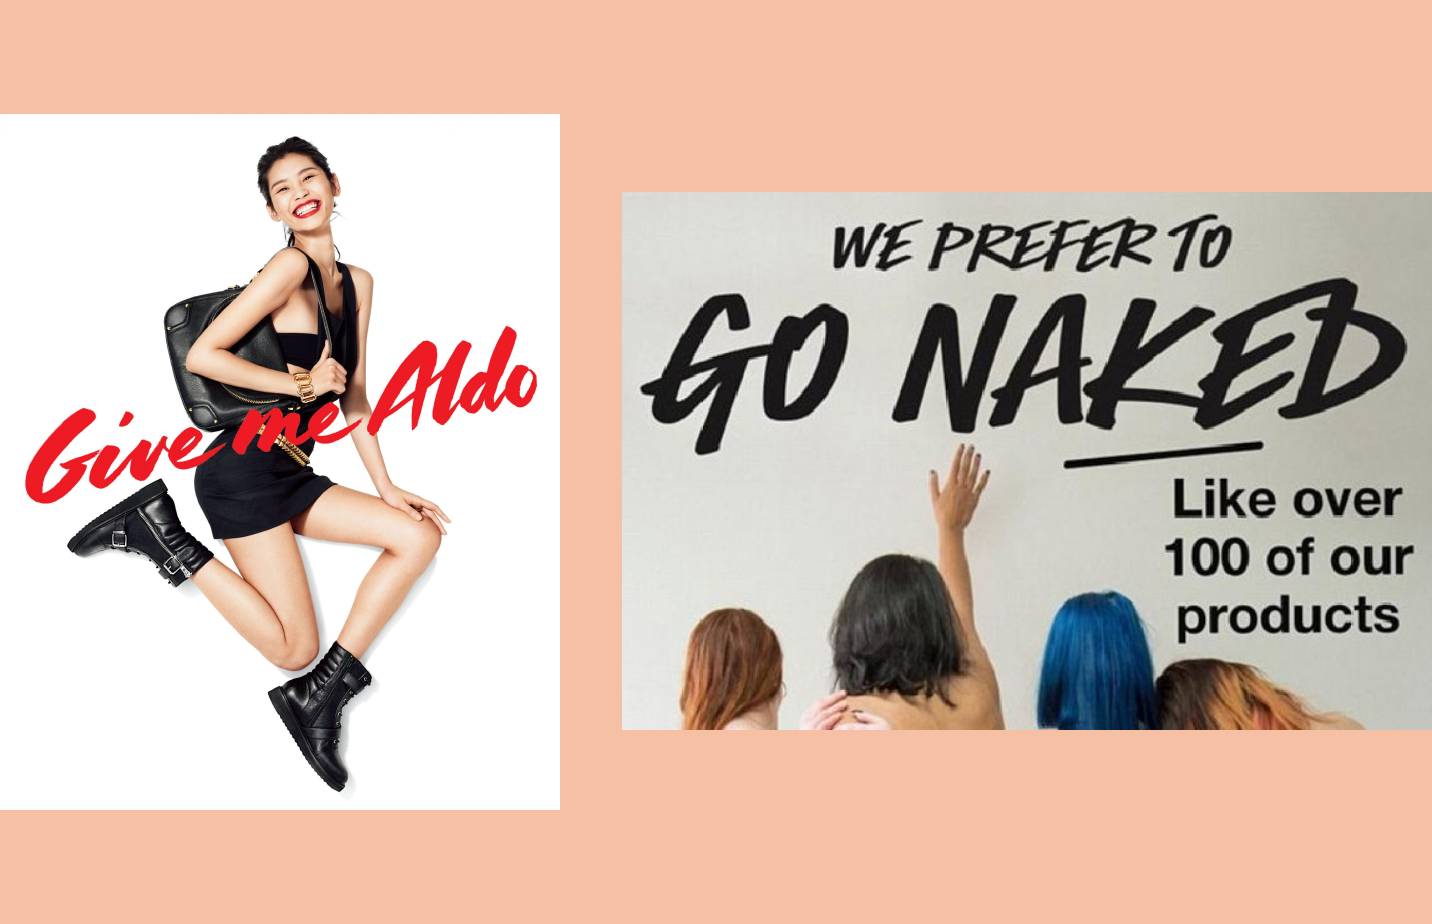 Two brands pictured here: Aldo and Lush. Aldo is a shoe brand. Lush is natural cosmetics. Both use script lettering in the campaigns. Aldo’s script is more organic; the letters are connected. Lush is more about personalization and emphasis, capitalized letters.